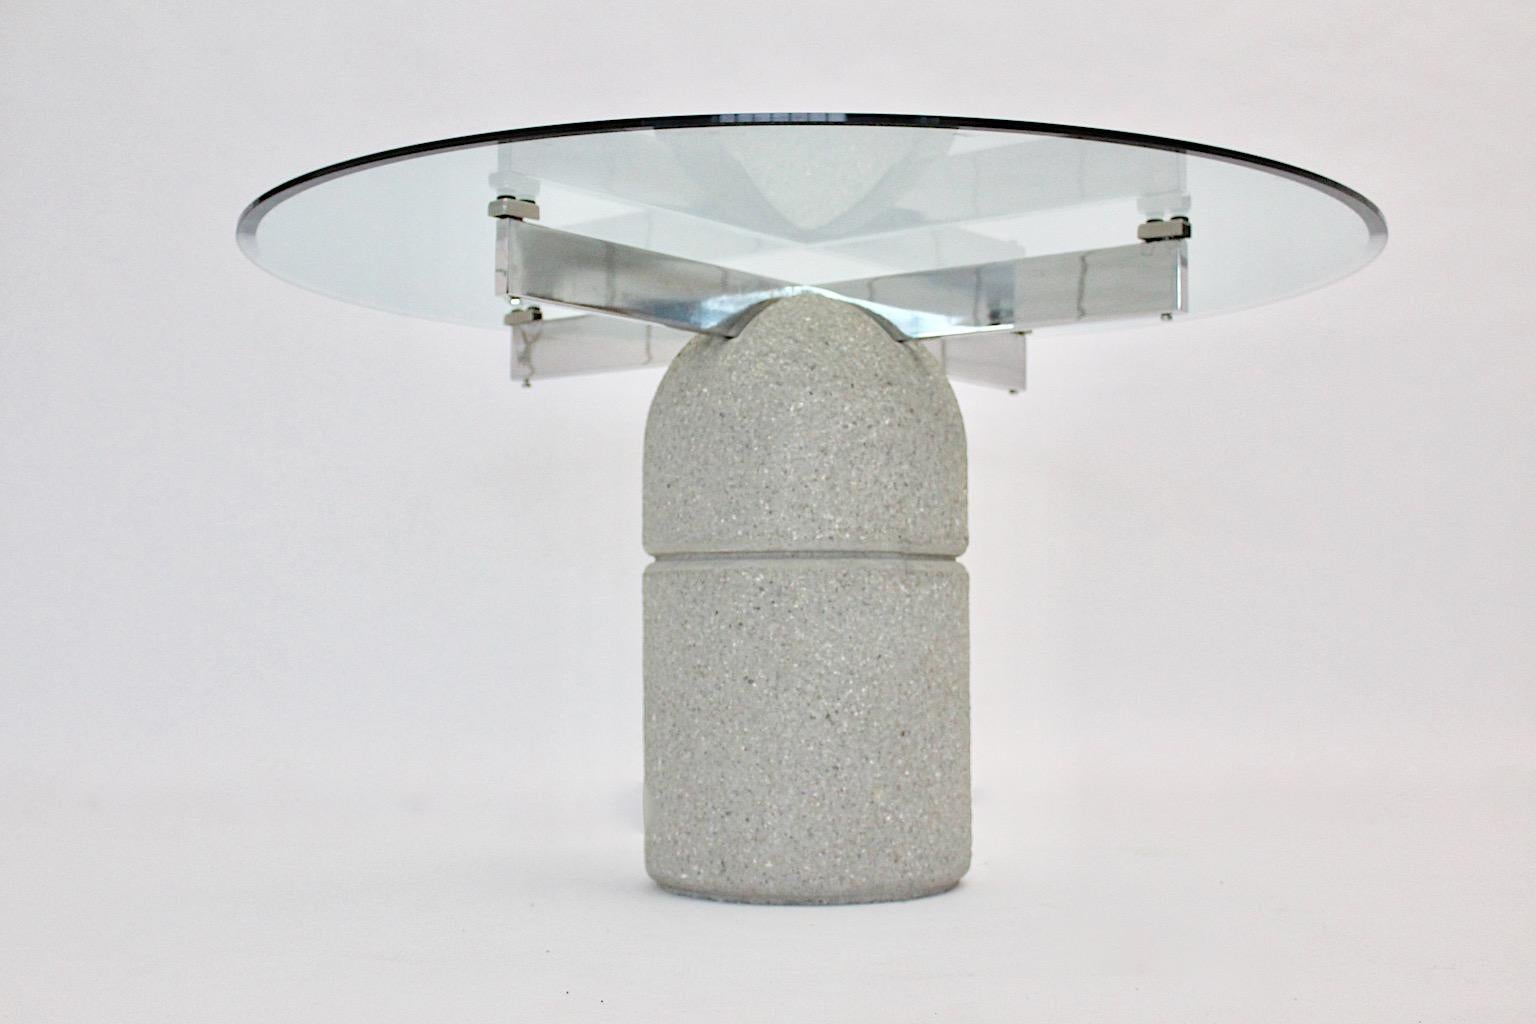 Italian Modernist Vintage Stone Dining Table Giovanni Offredi for Saporiti 1973 Italy For Sale